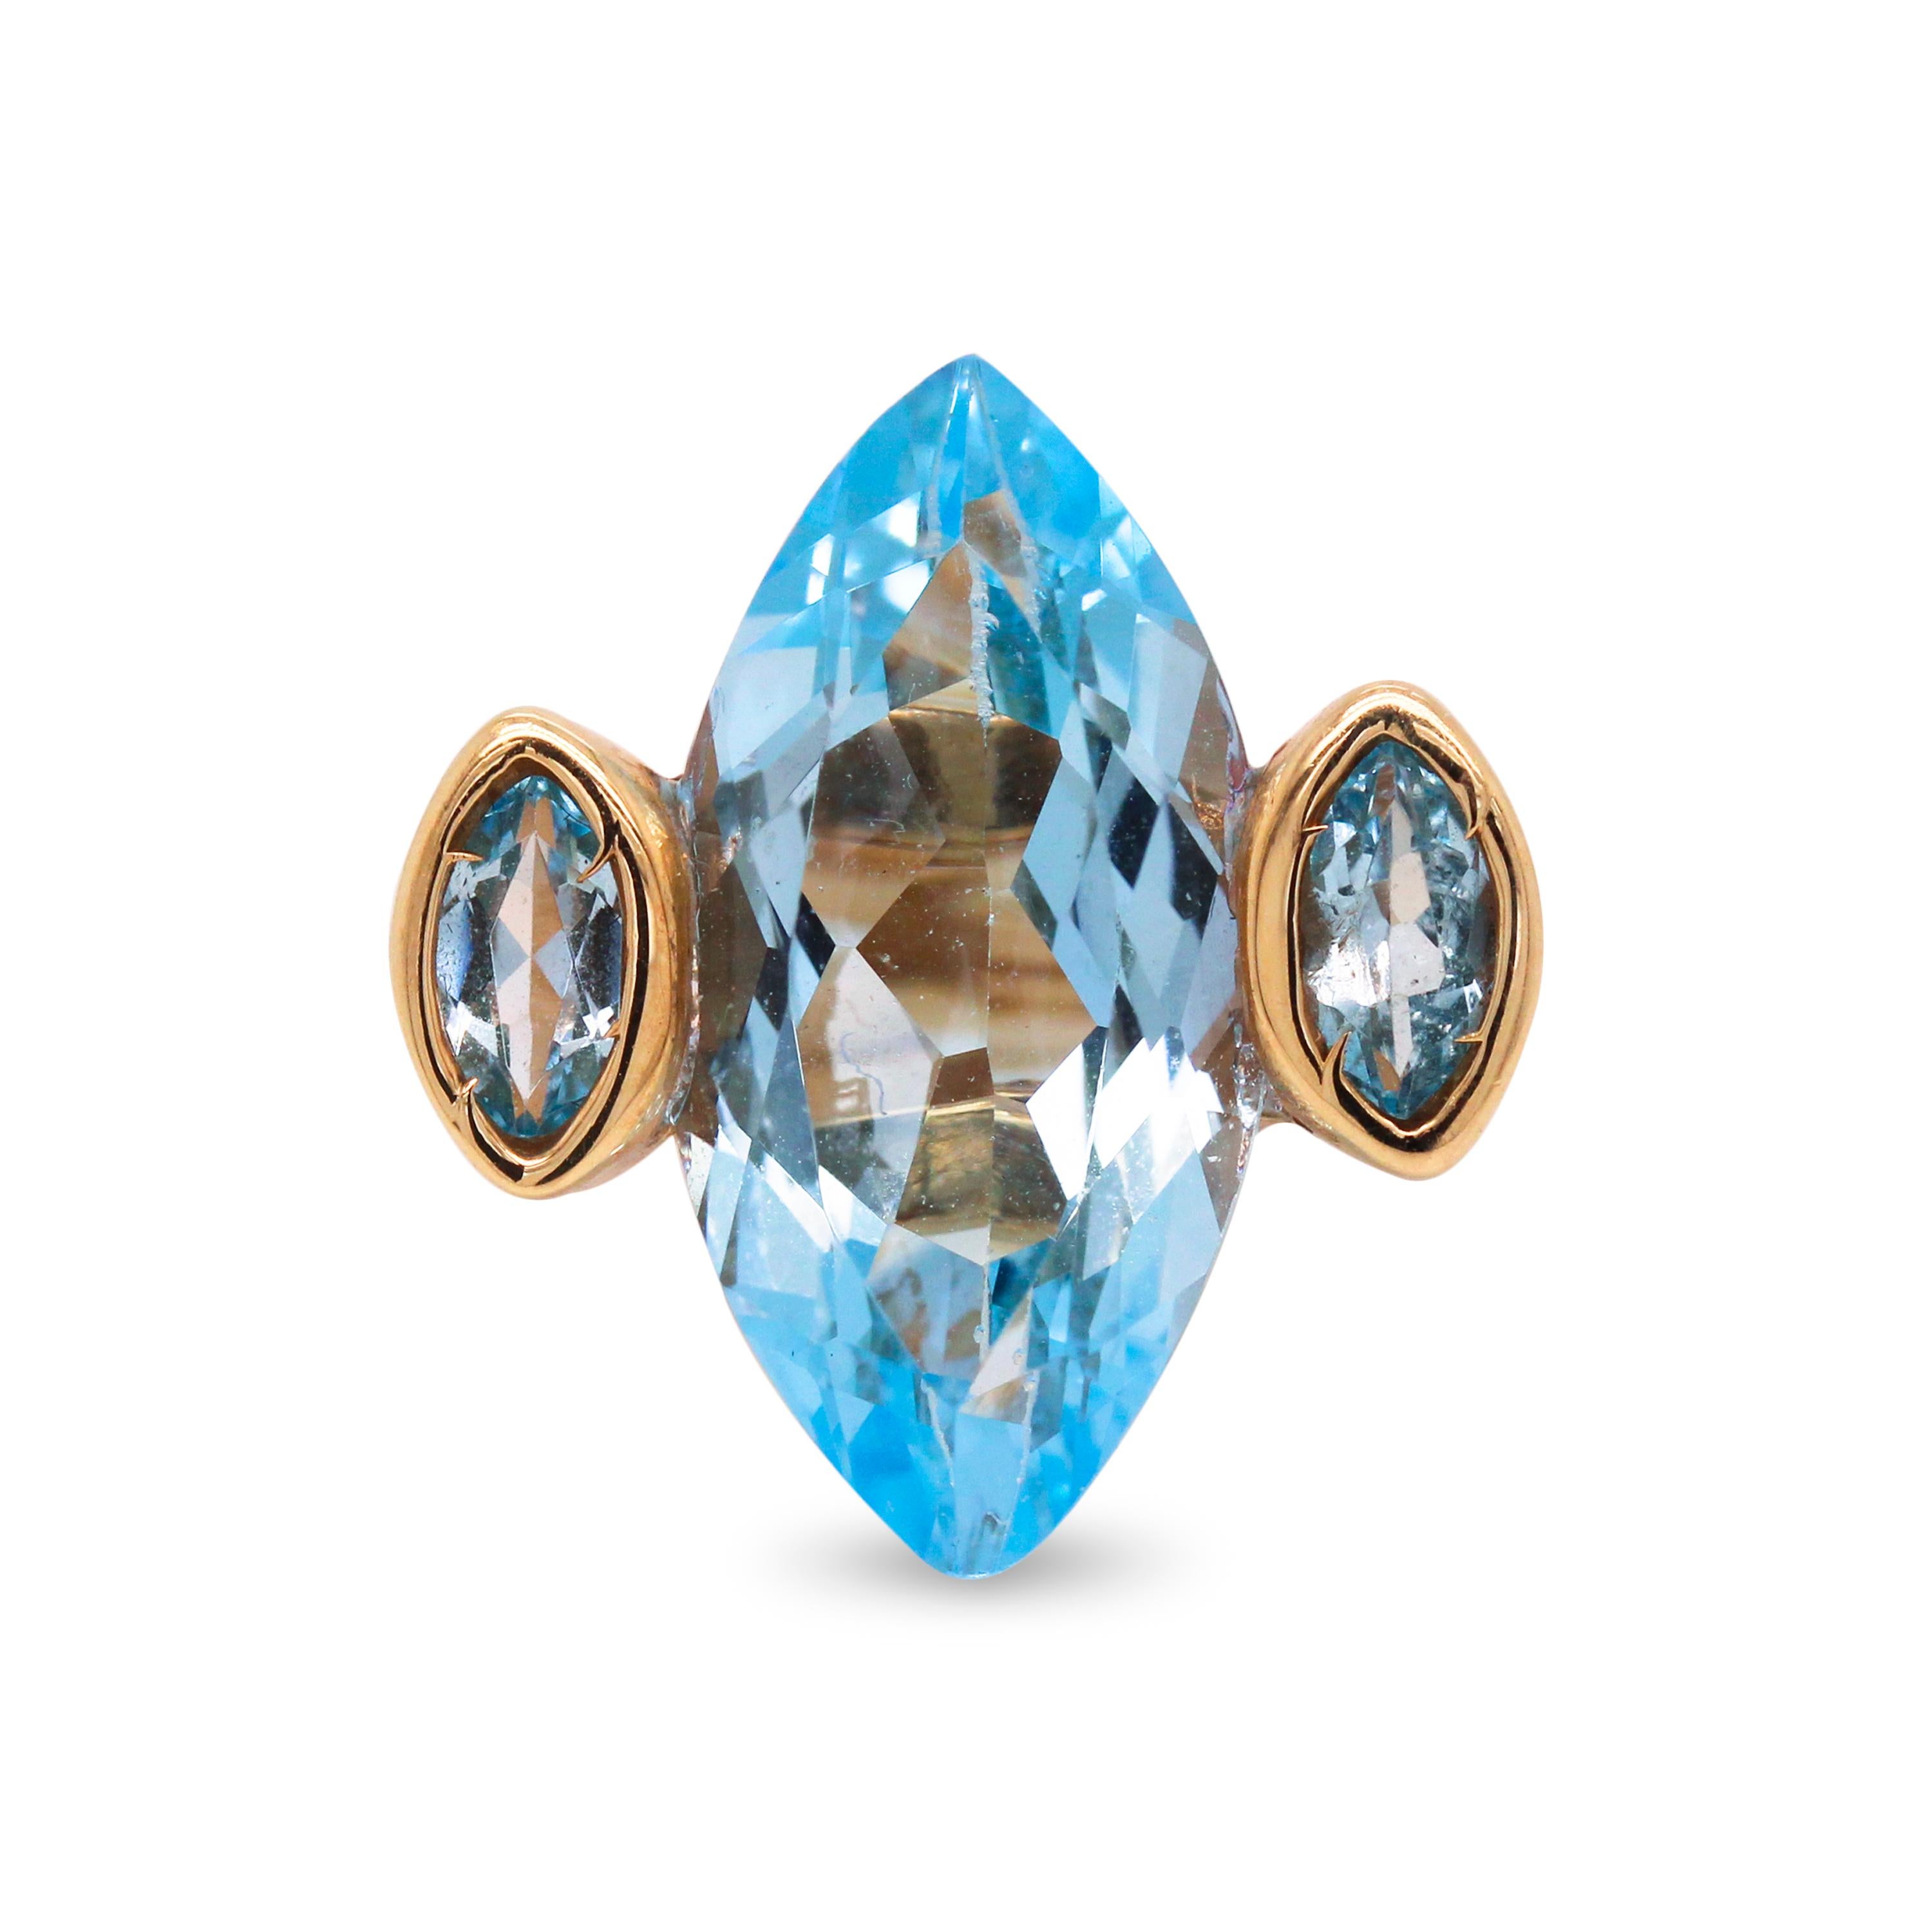 Marquise Blue Topaz 14K Yellow Gold Three Stone Cocktail Ring

A fun, cute and everyday ring brings together a large Blue Topaz center with two smaller marquise Blue Topaz on both sides. 

Made in solid 14K Gold.

Blue Topaz center is apprx. 10